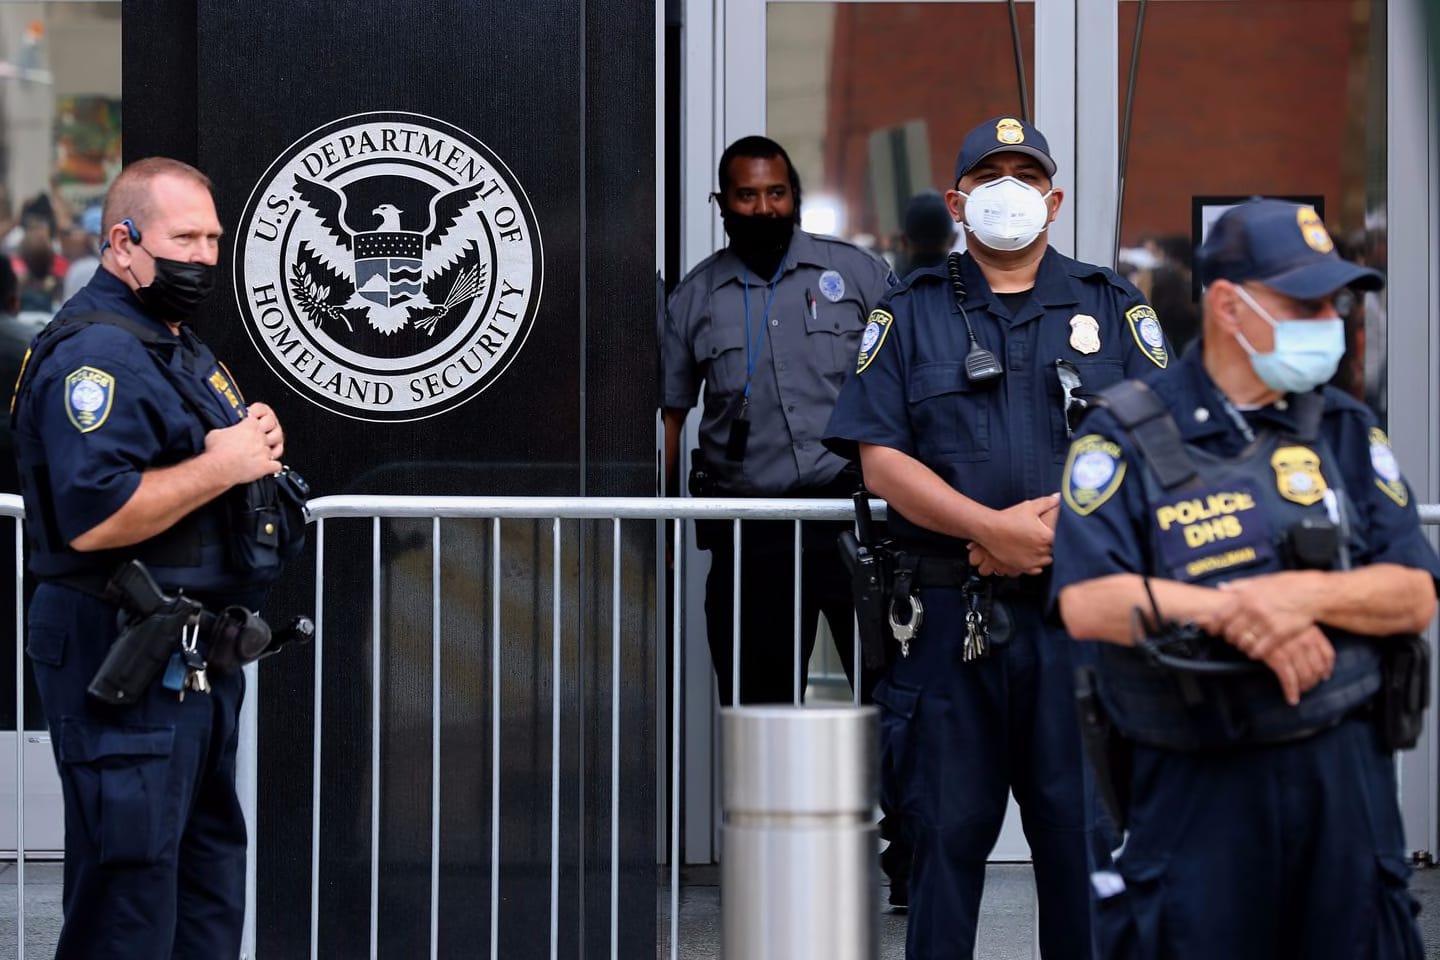 Homeland Security Police kept watch as thousands of demonstrators from across the country rally outside of Immigration and Customs Enforcement headquarters on September 21, 2021 in Washington, DC.